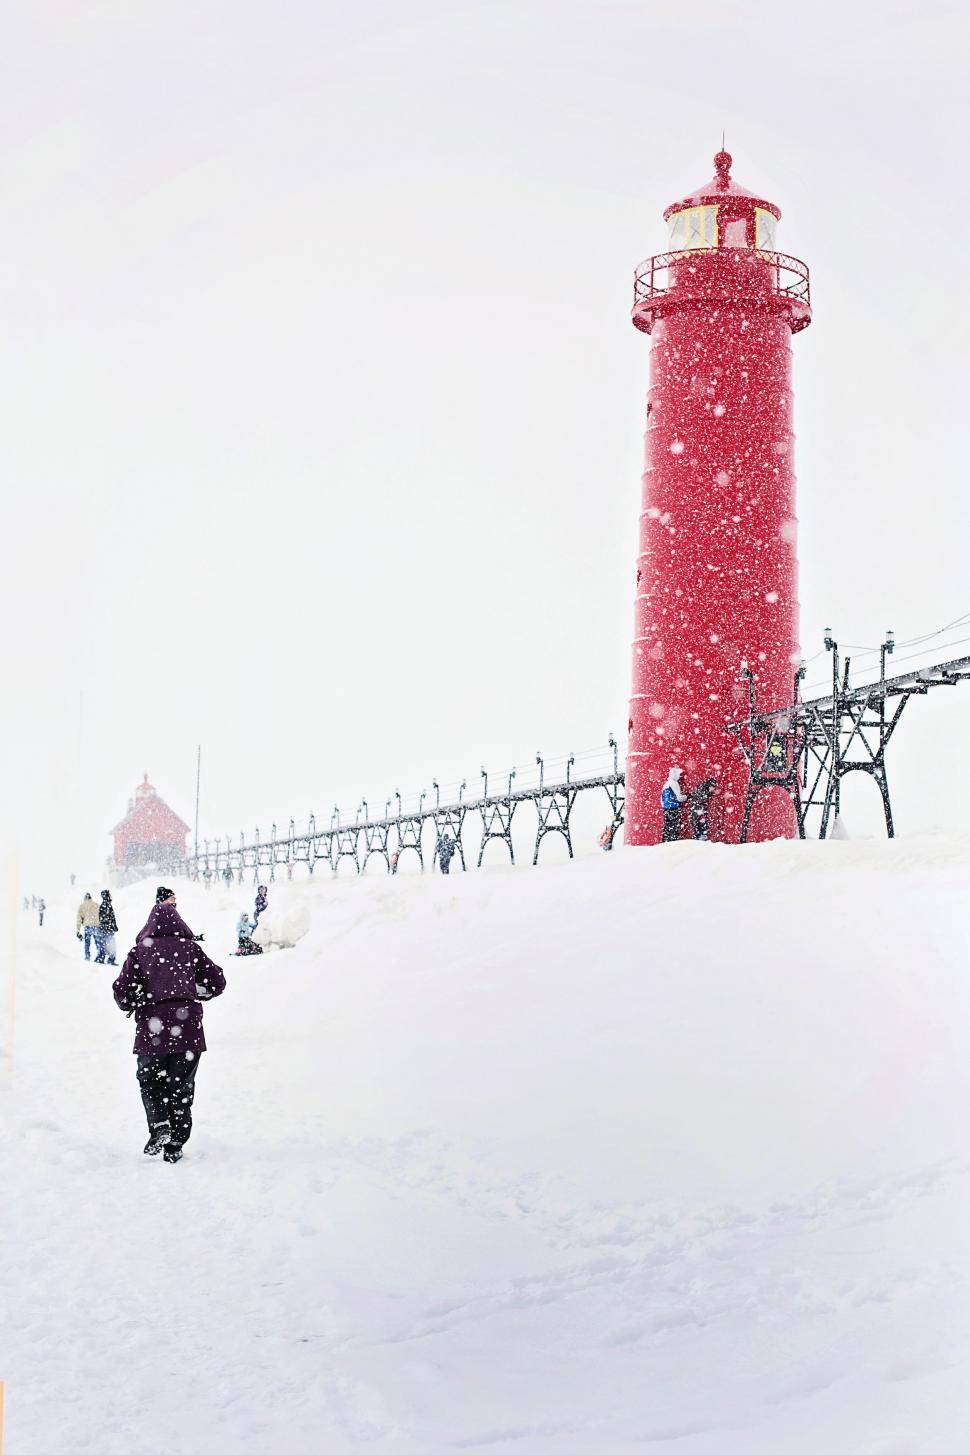 Free Image of Lighthouse in Snow 